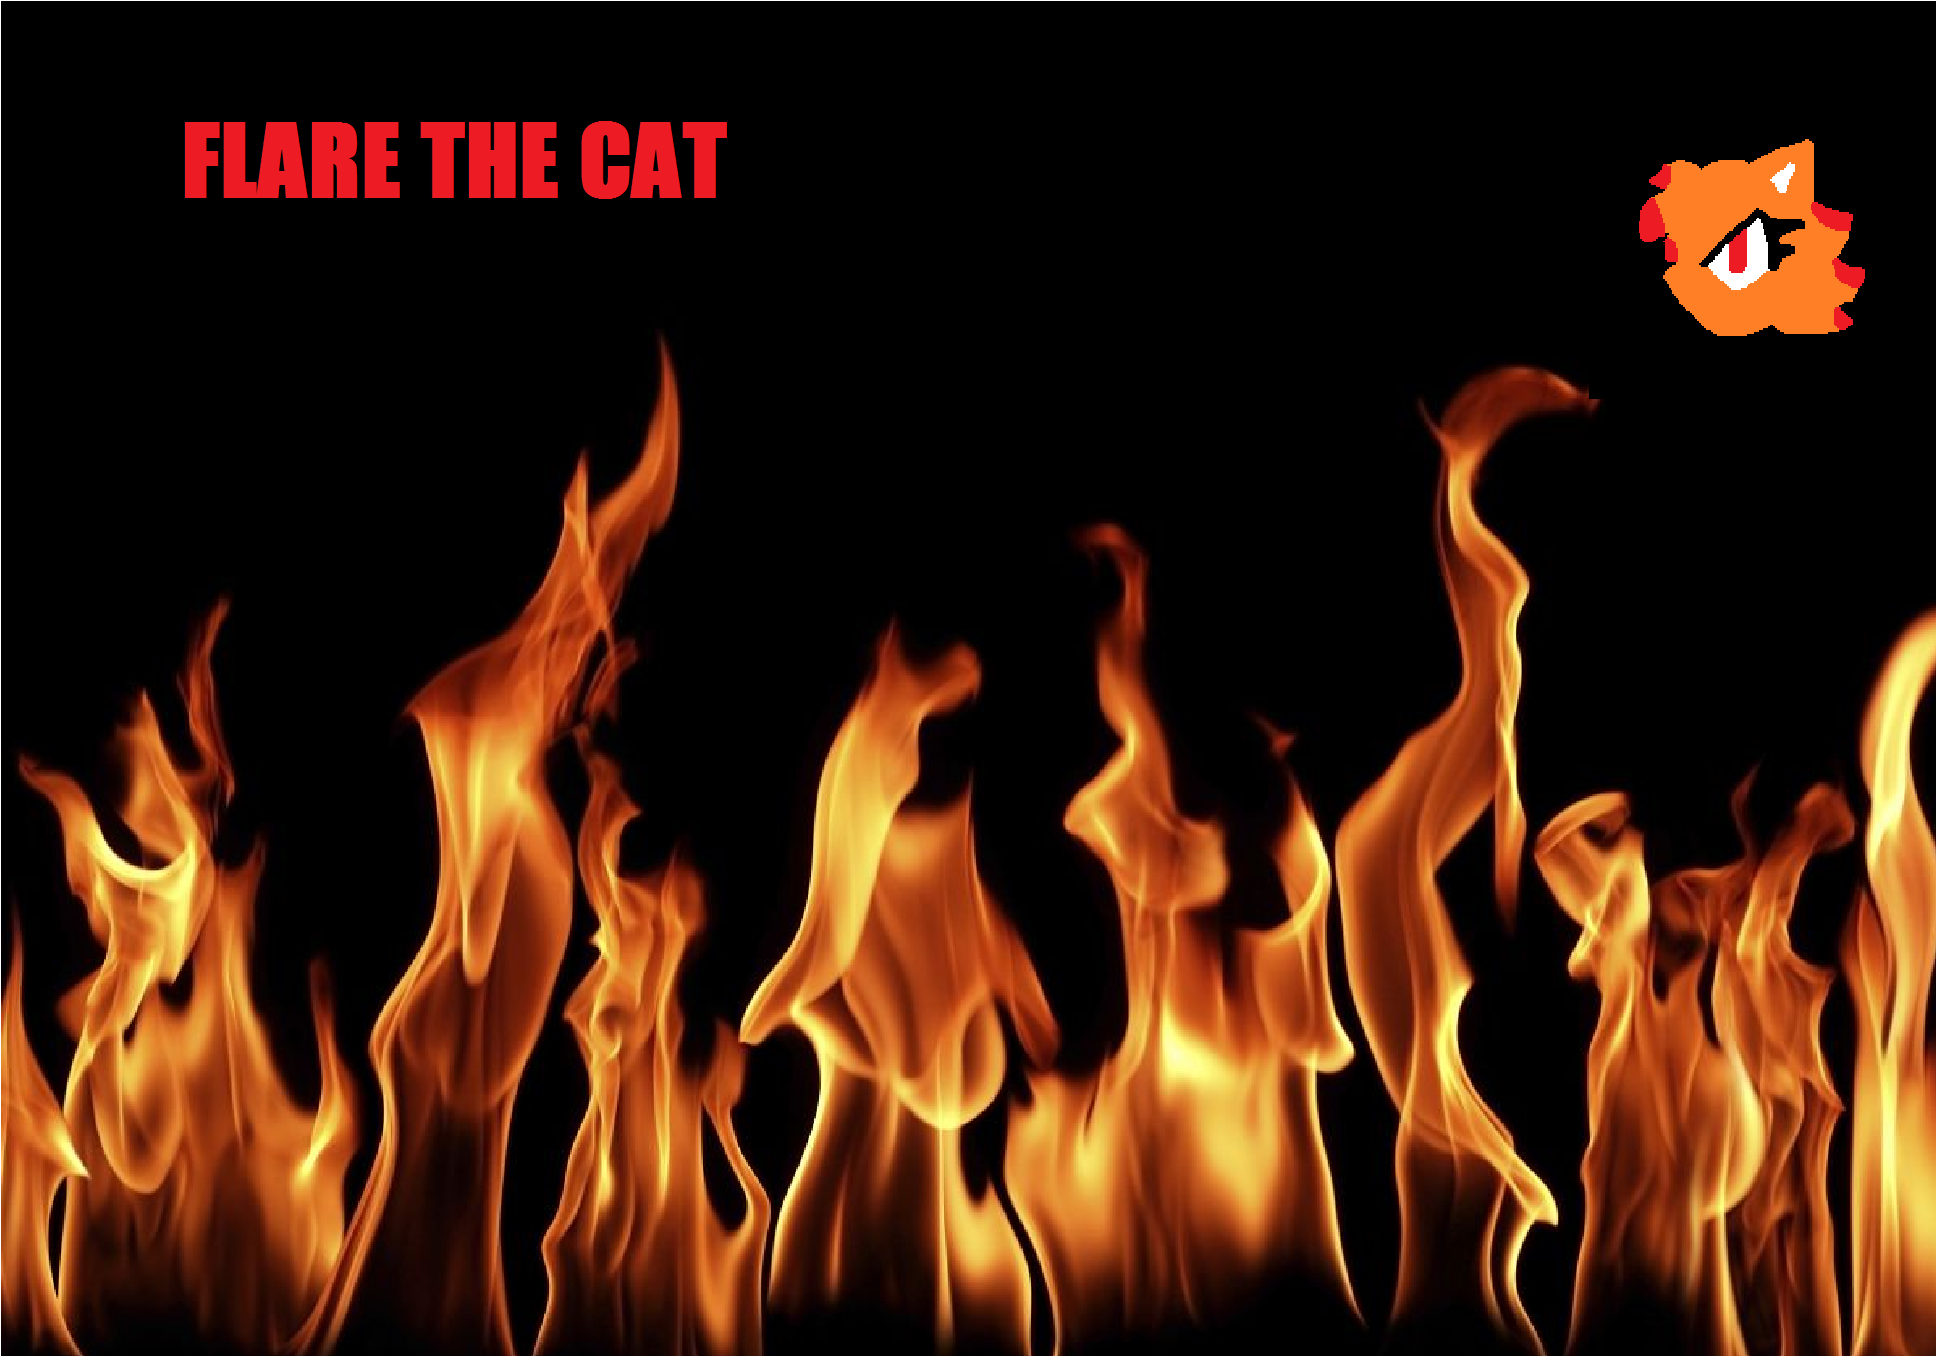 Flare The Cat- Wallpaper - Heat Fire Thermal Energy - HD Wallpaper 